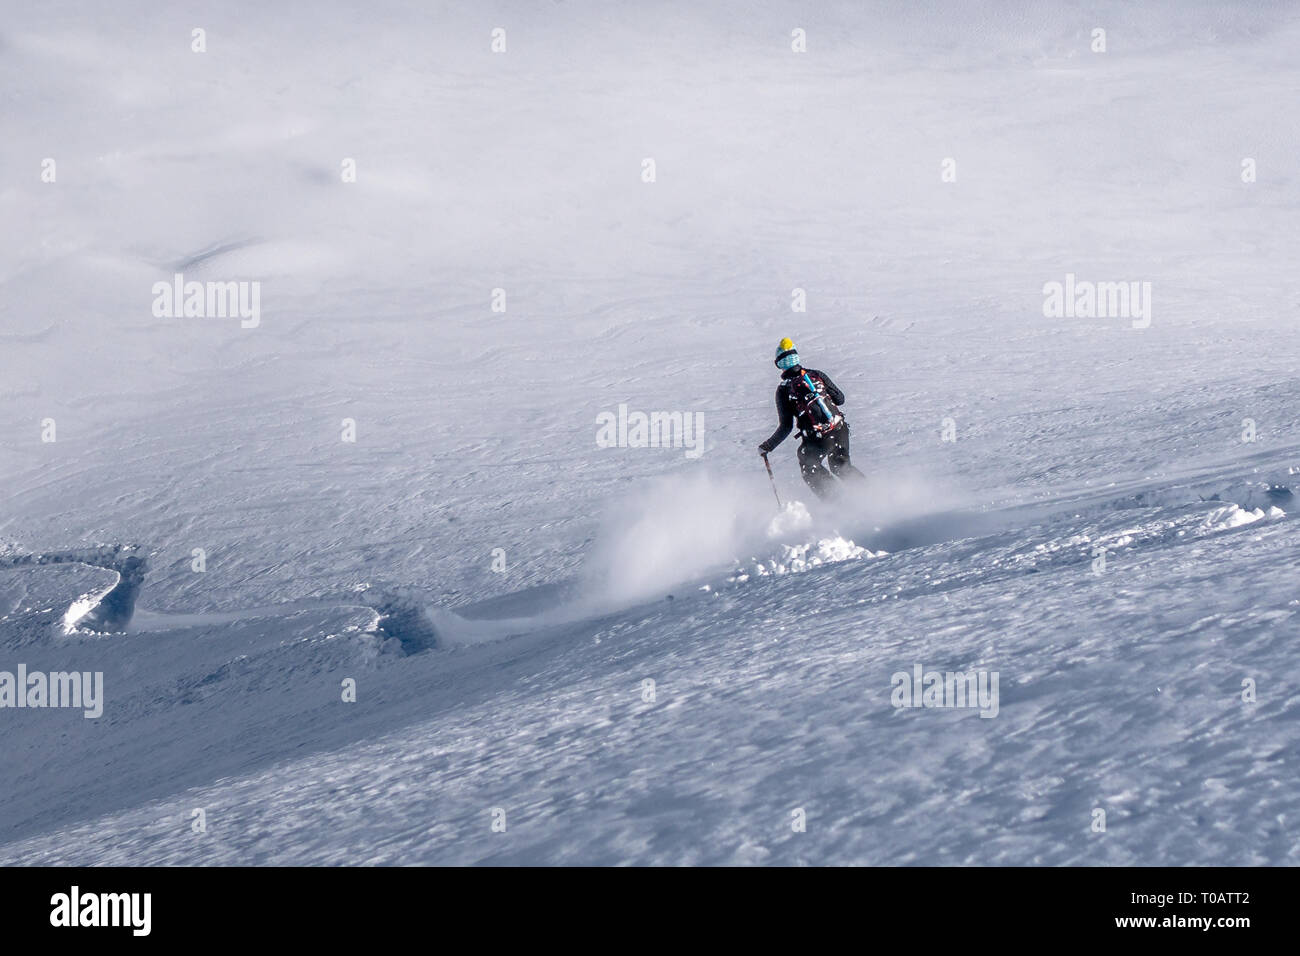 Chamonix, France - 5 February 2019: A female freeride skier descending a slope with fresh powder snow in the Vallon de Berard in the Aiguilles Rouges  Stock Photo